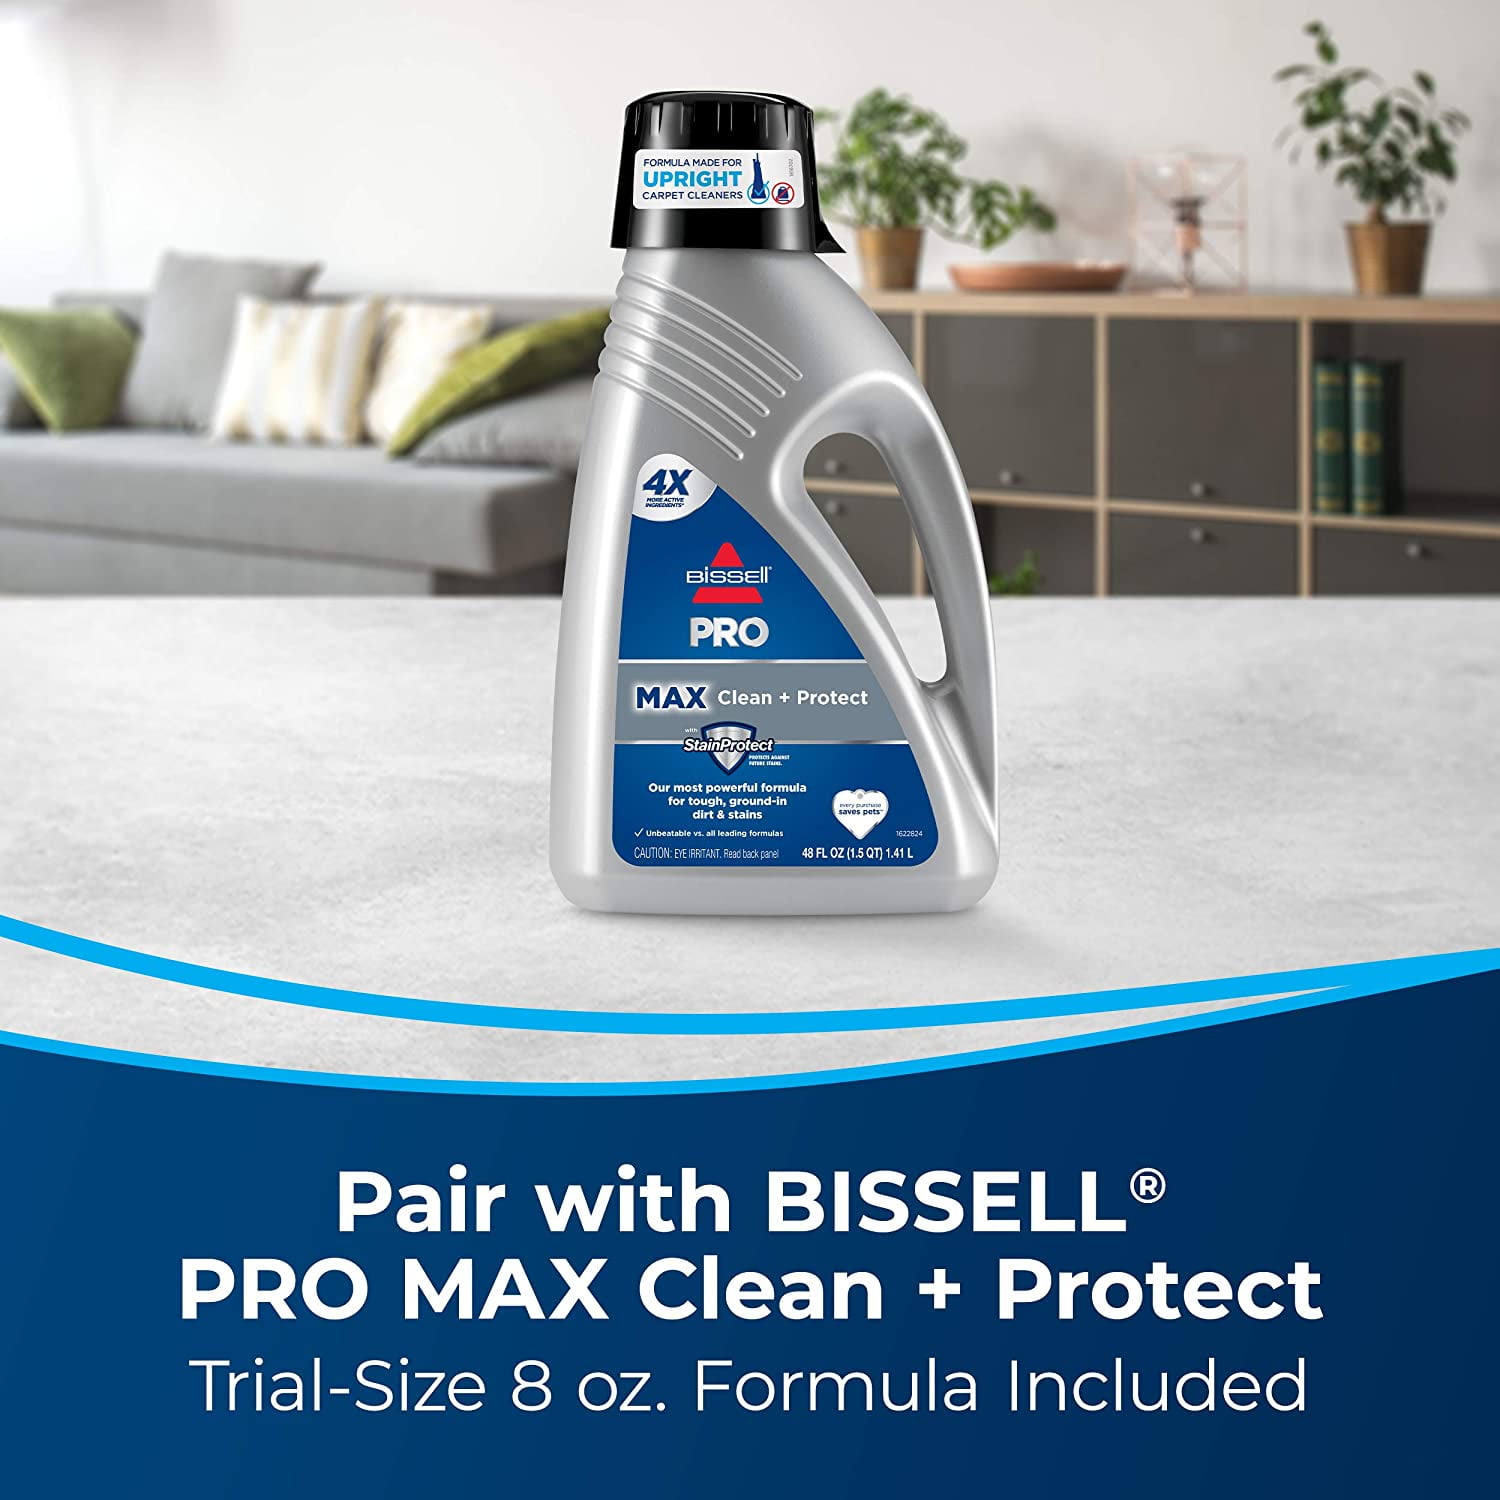 Clean Spot Carpet 3624 Professional Portable BISSELL Corded Cleaner